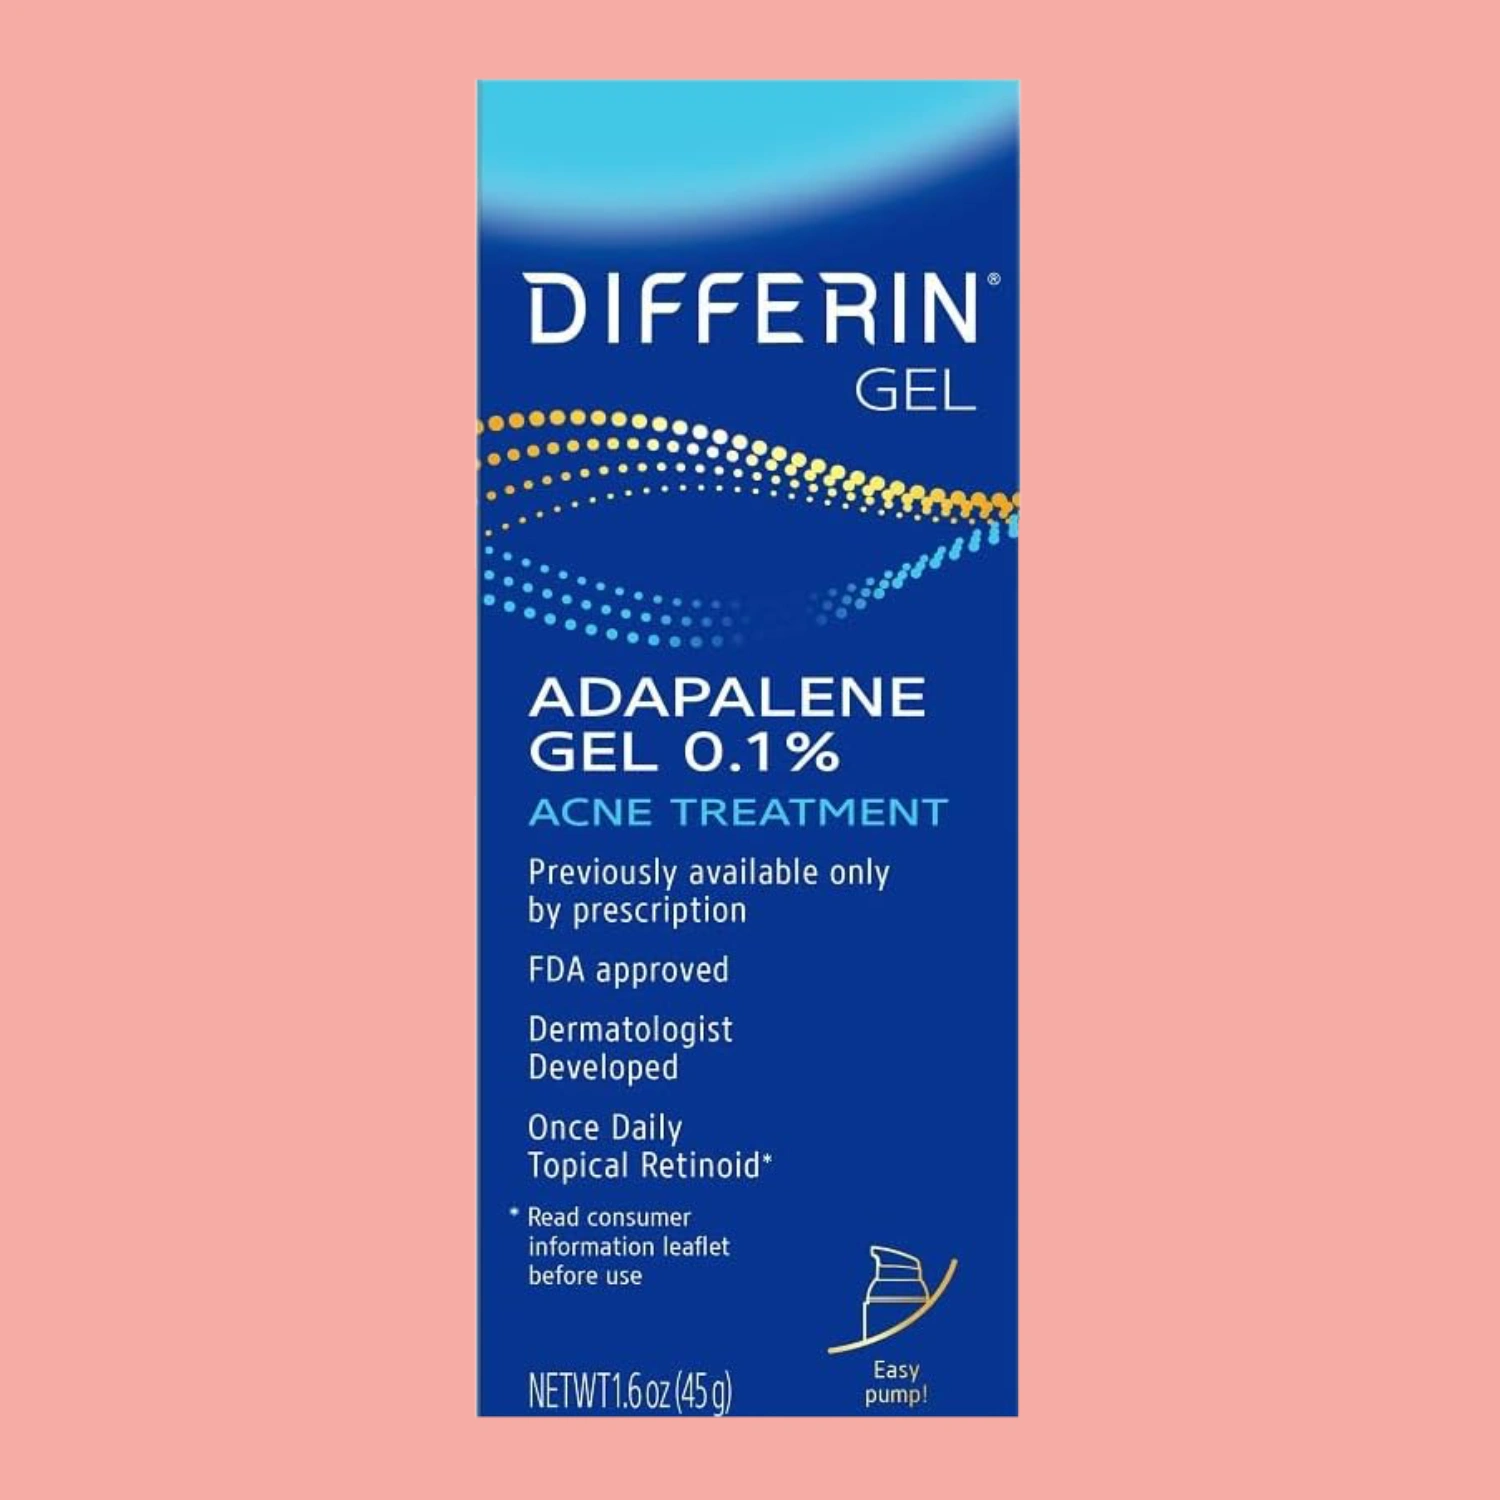 Differin Acne Treatment Gel tube displayed on a neutral background, featuring adapalene for effective acne treatment.